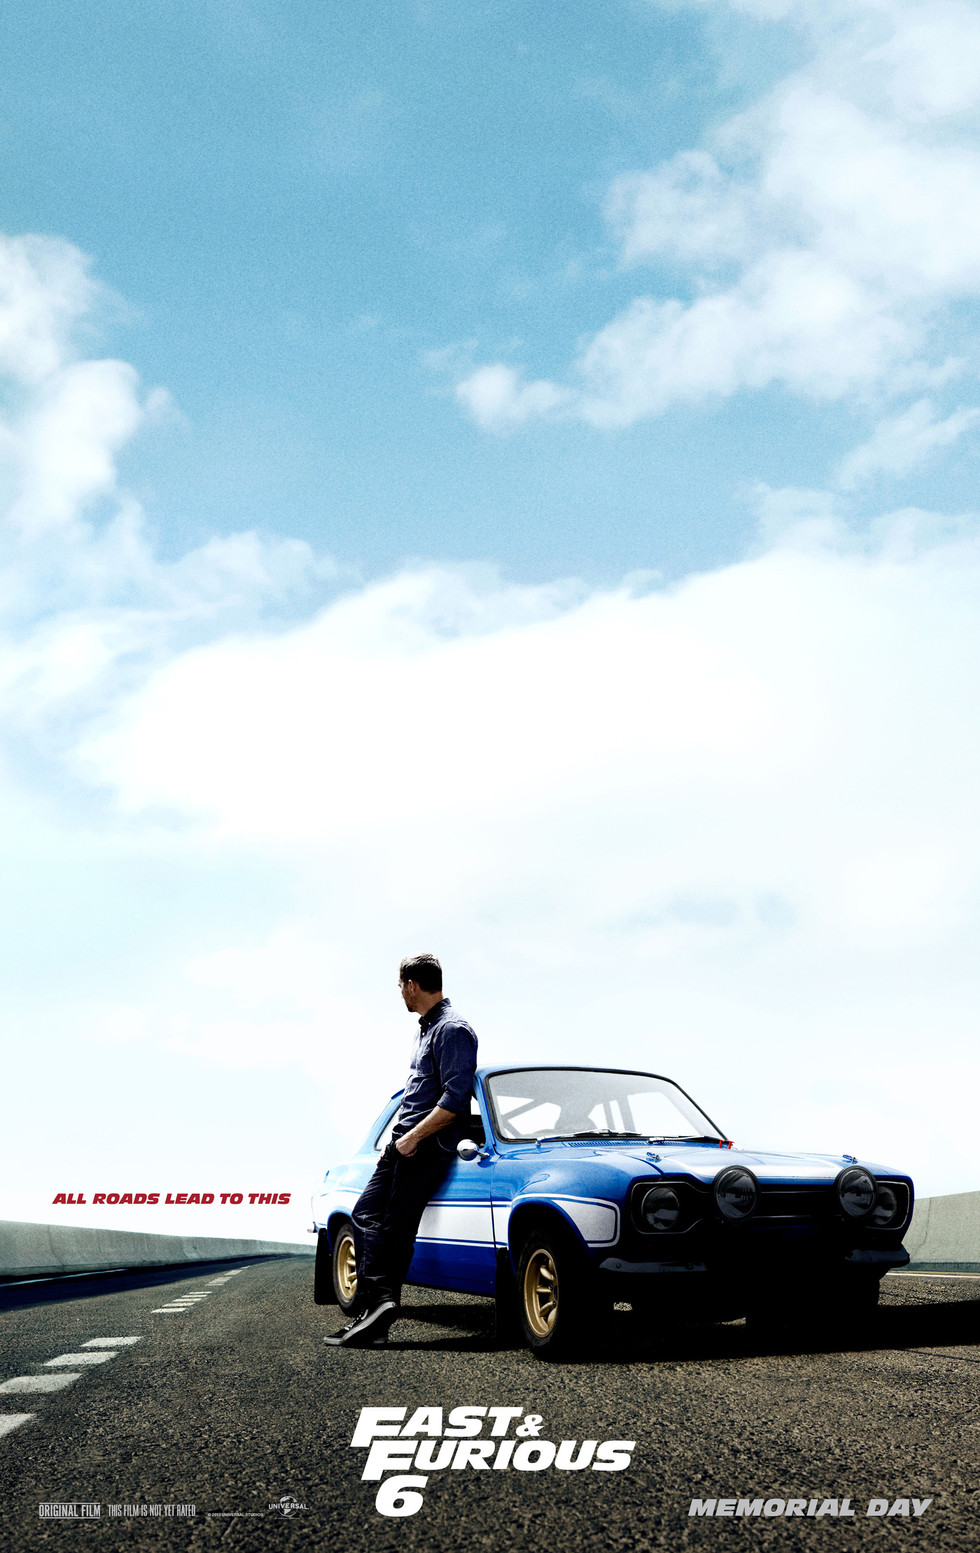 Fast & Furious 6 - Movie Poster #2 (Large)